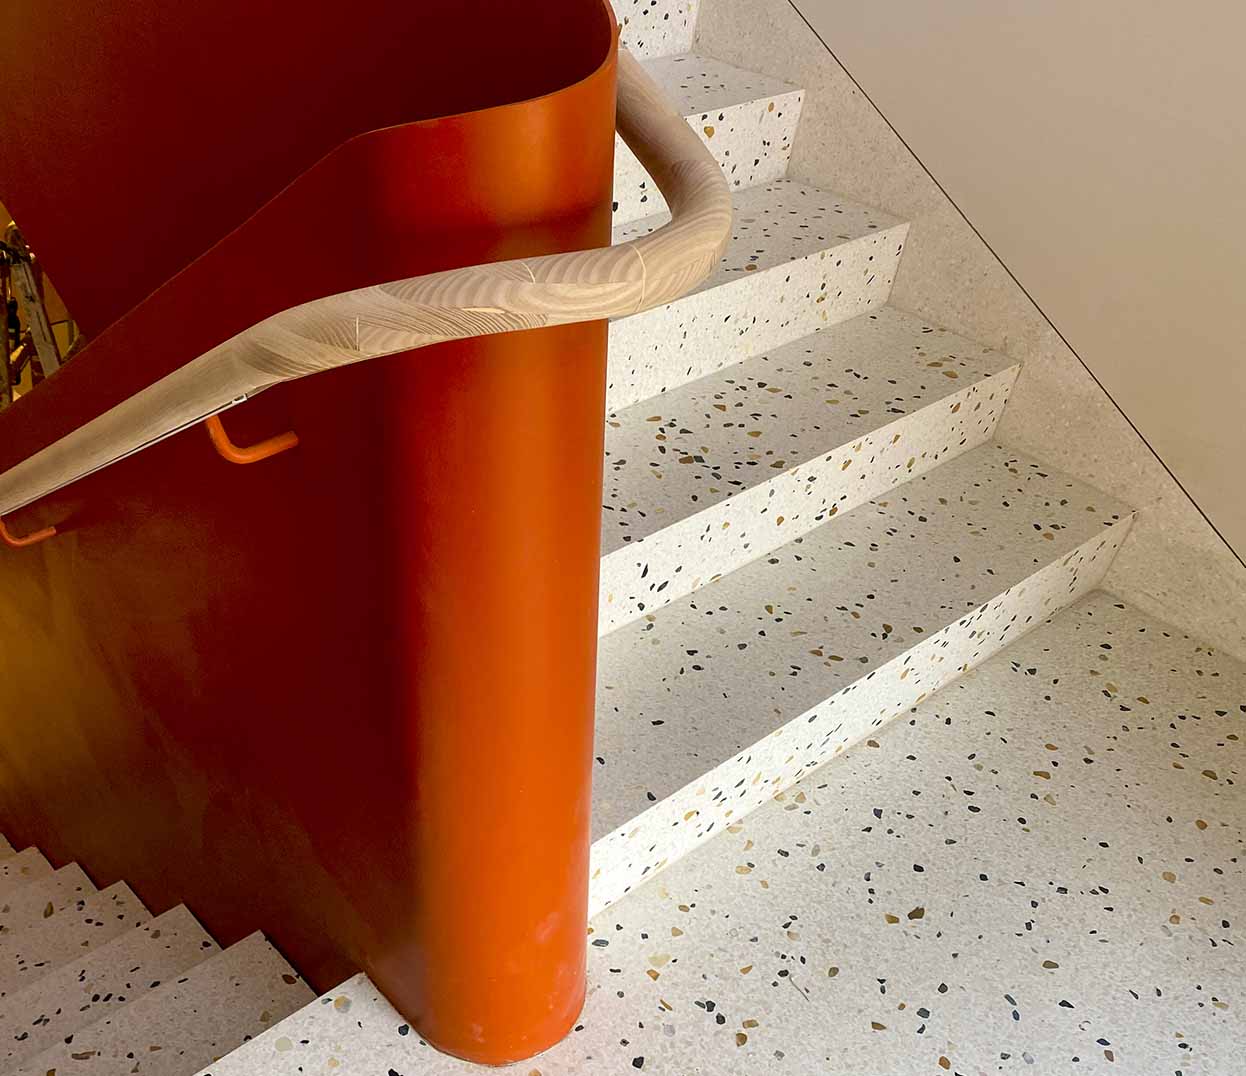 terrazzo stairs in residential building